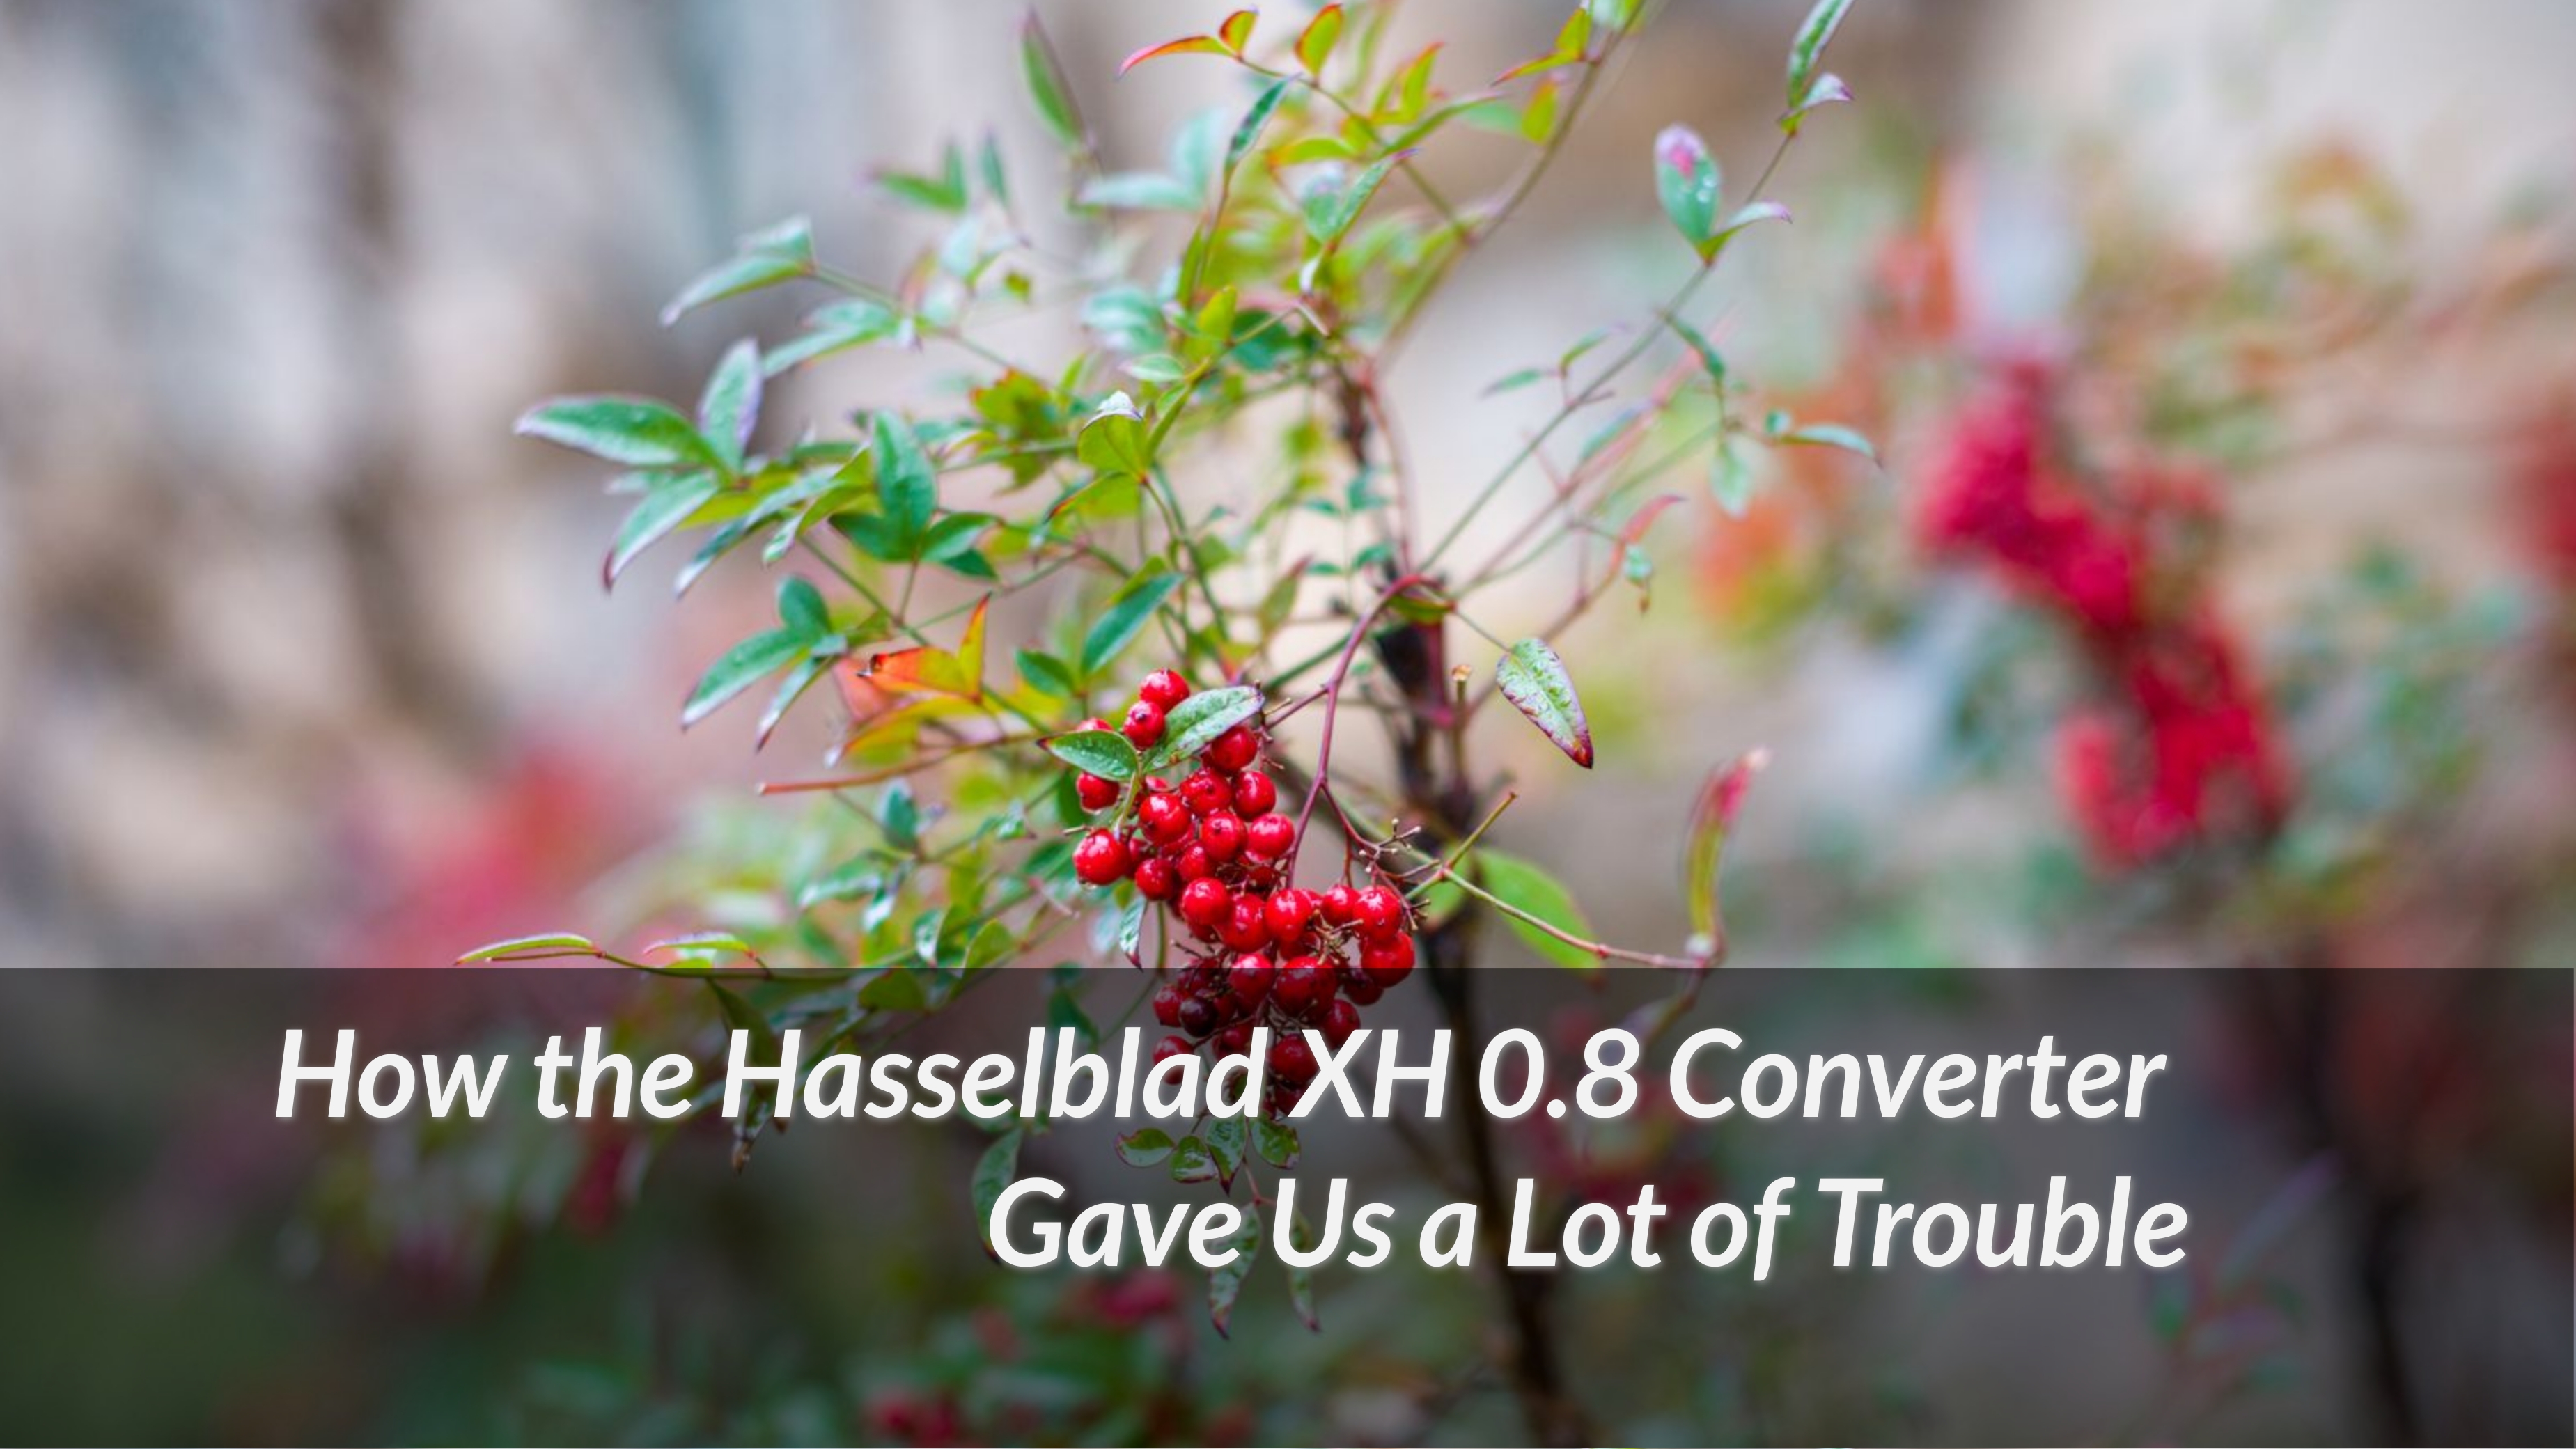 How-the-Hasselblad-XH-0.8-Converter-Gave-Us-a-Lot-of-Trouble-2